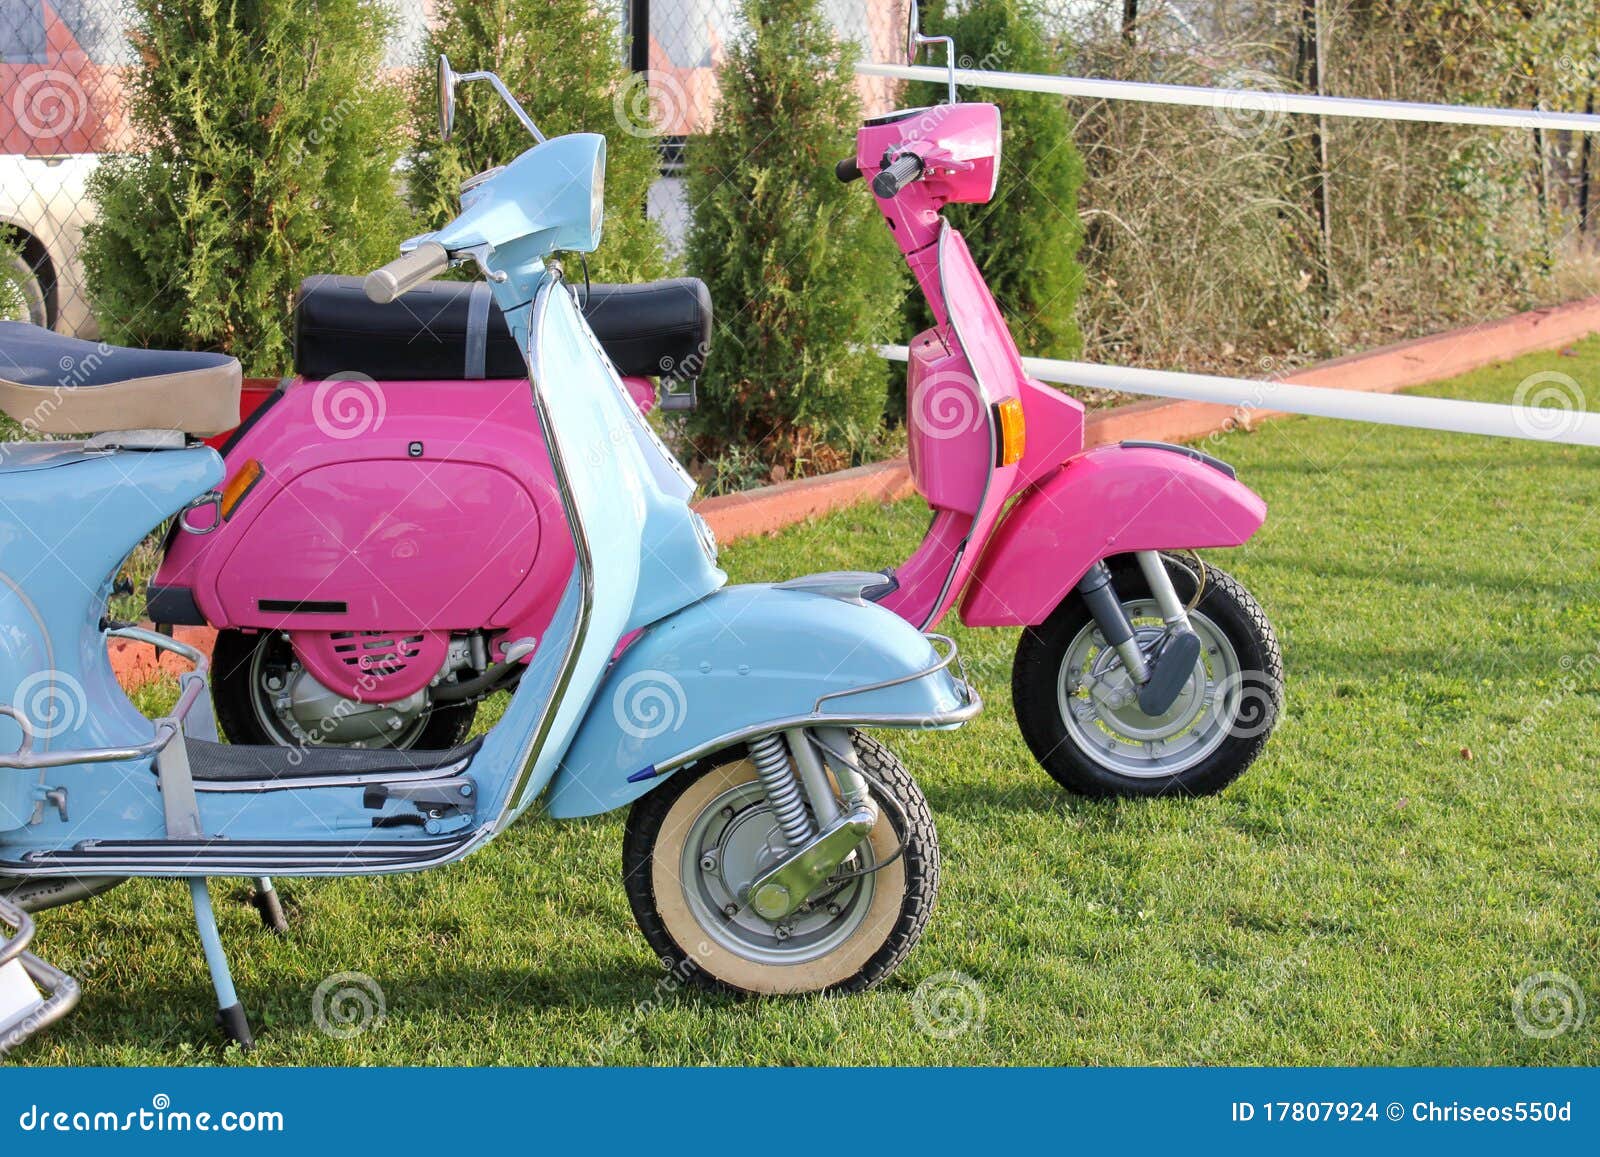 Antique Motor Scooters Stock Images  Image: 17807924